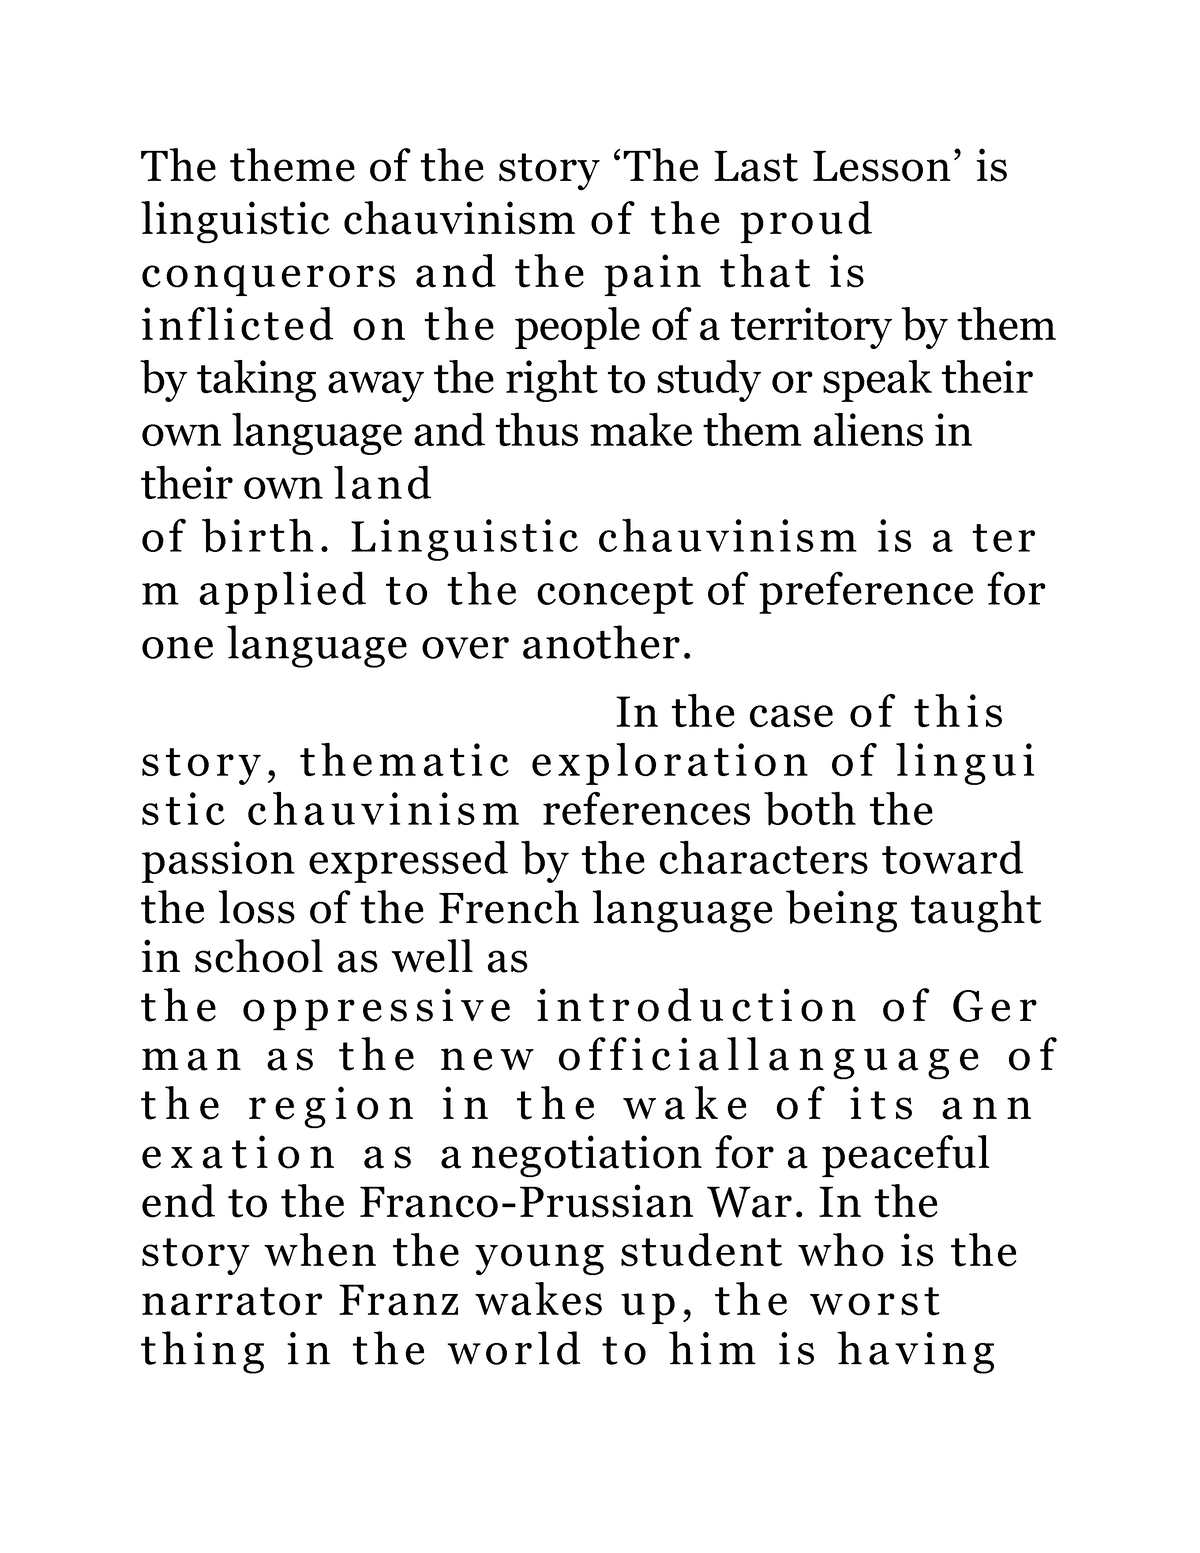 essay on linguistic chauvinism